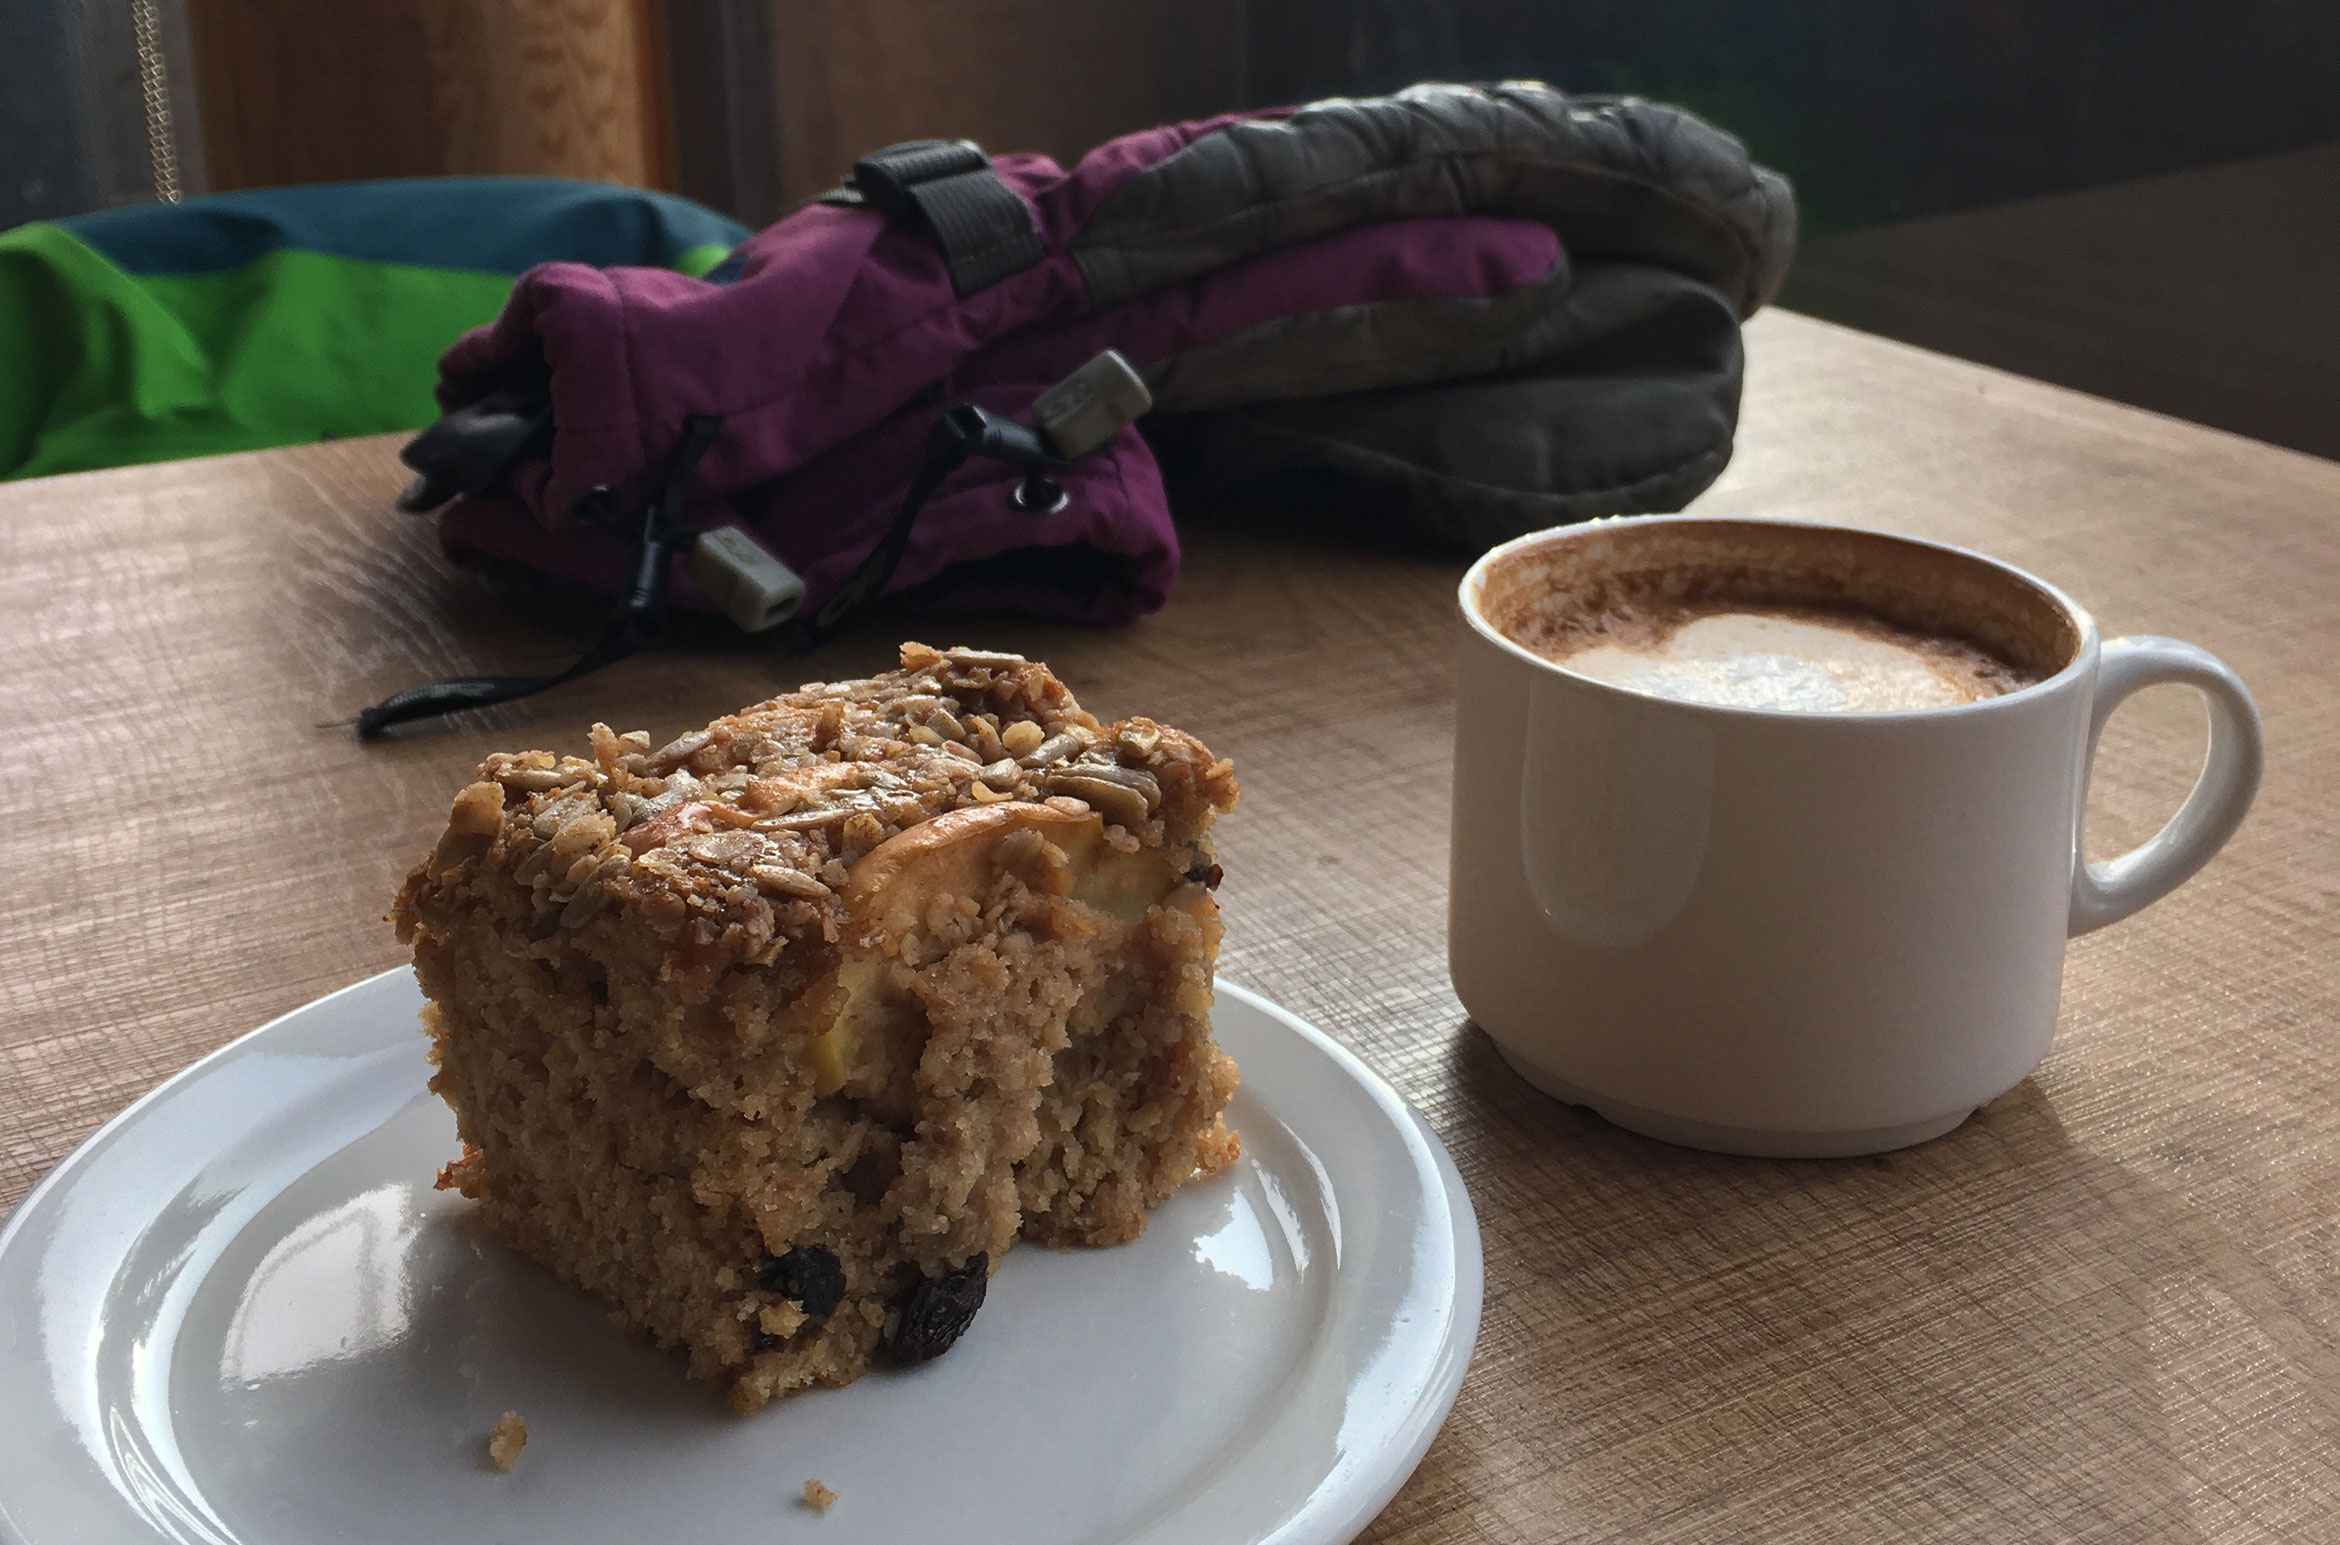 Kate's cake and coffee after cross-country skiing in Whistler.